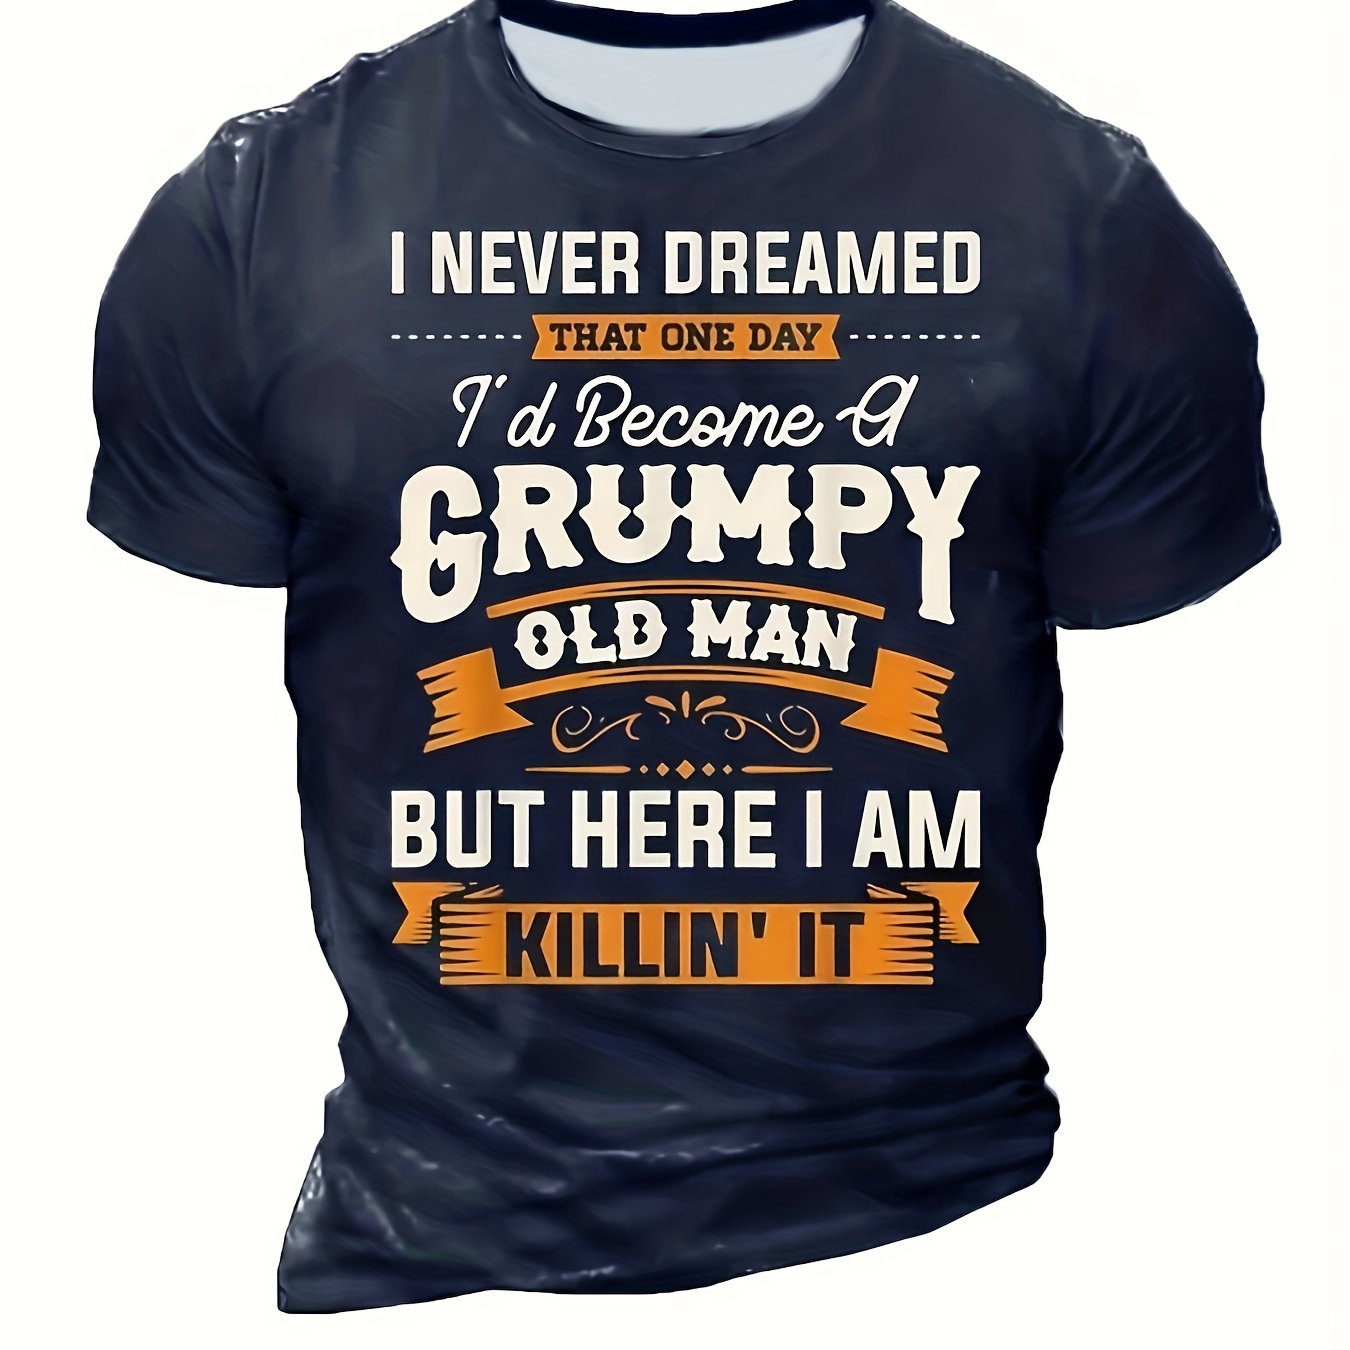 

Grumpy Old Man Pattern Print Men's T-shirt, Graphic Tee Men's Summer Clothes, Men's Outfits